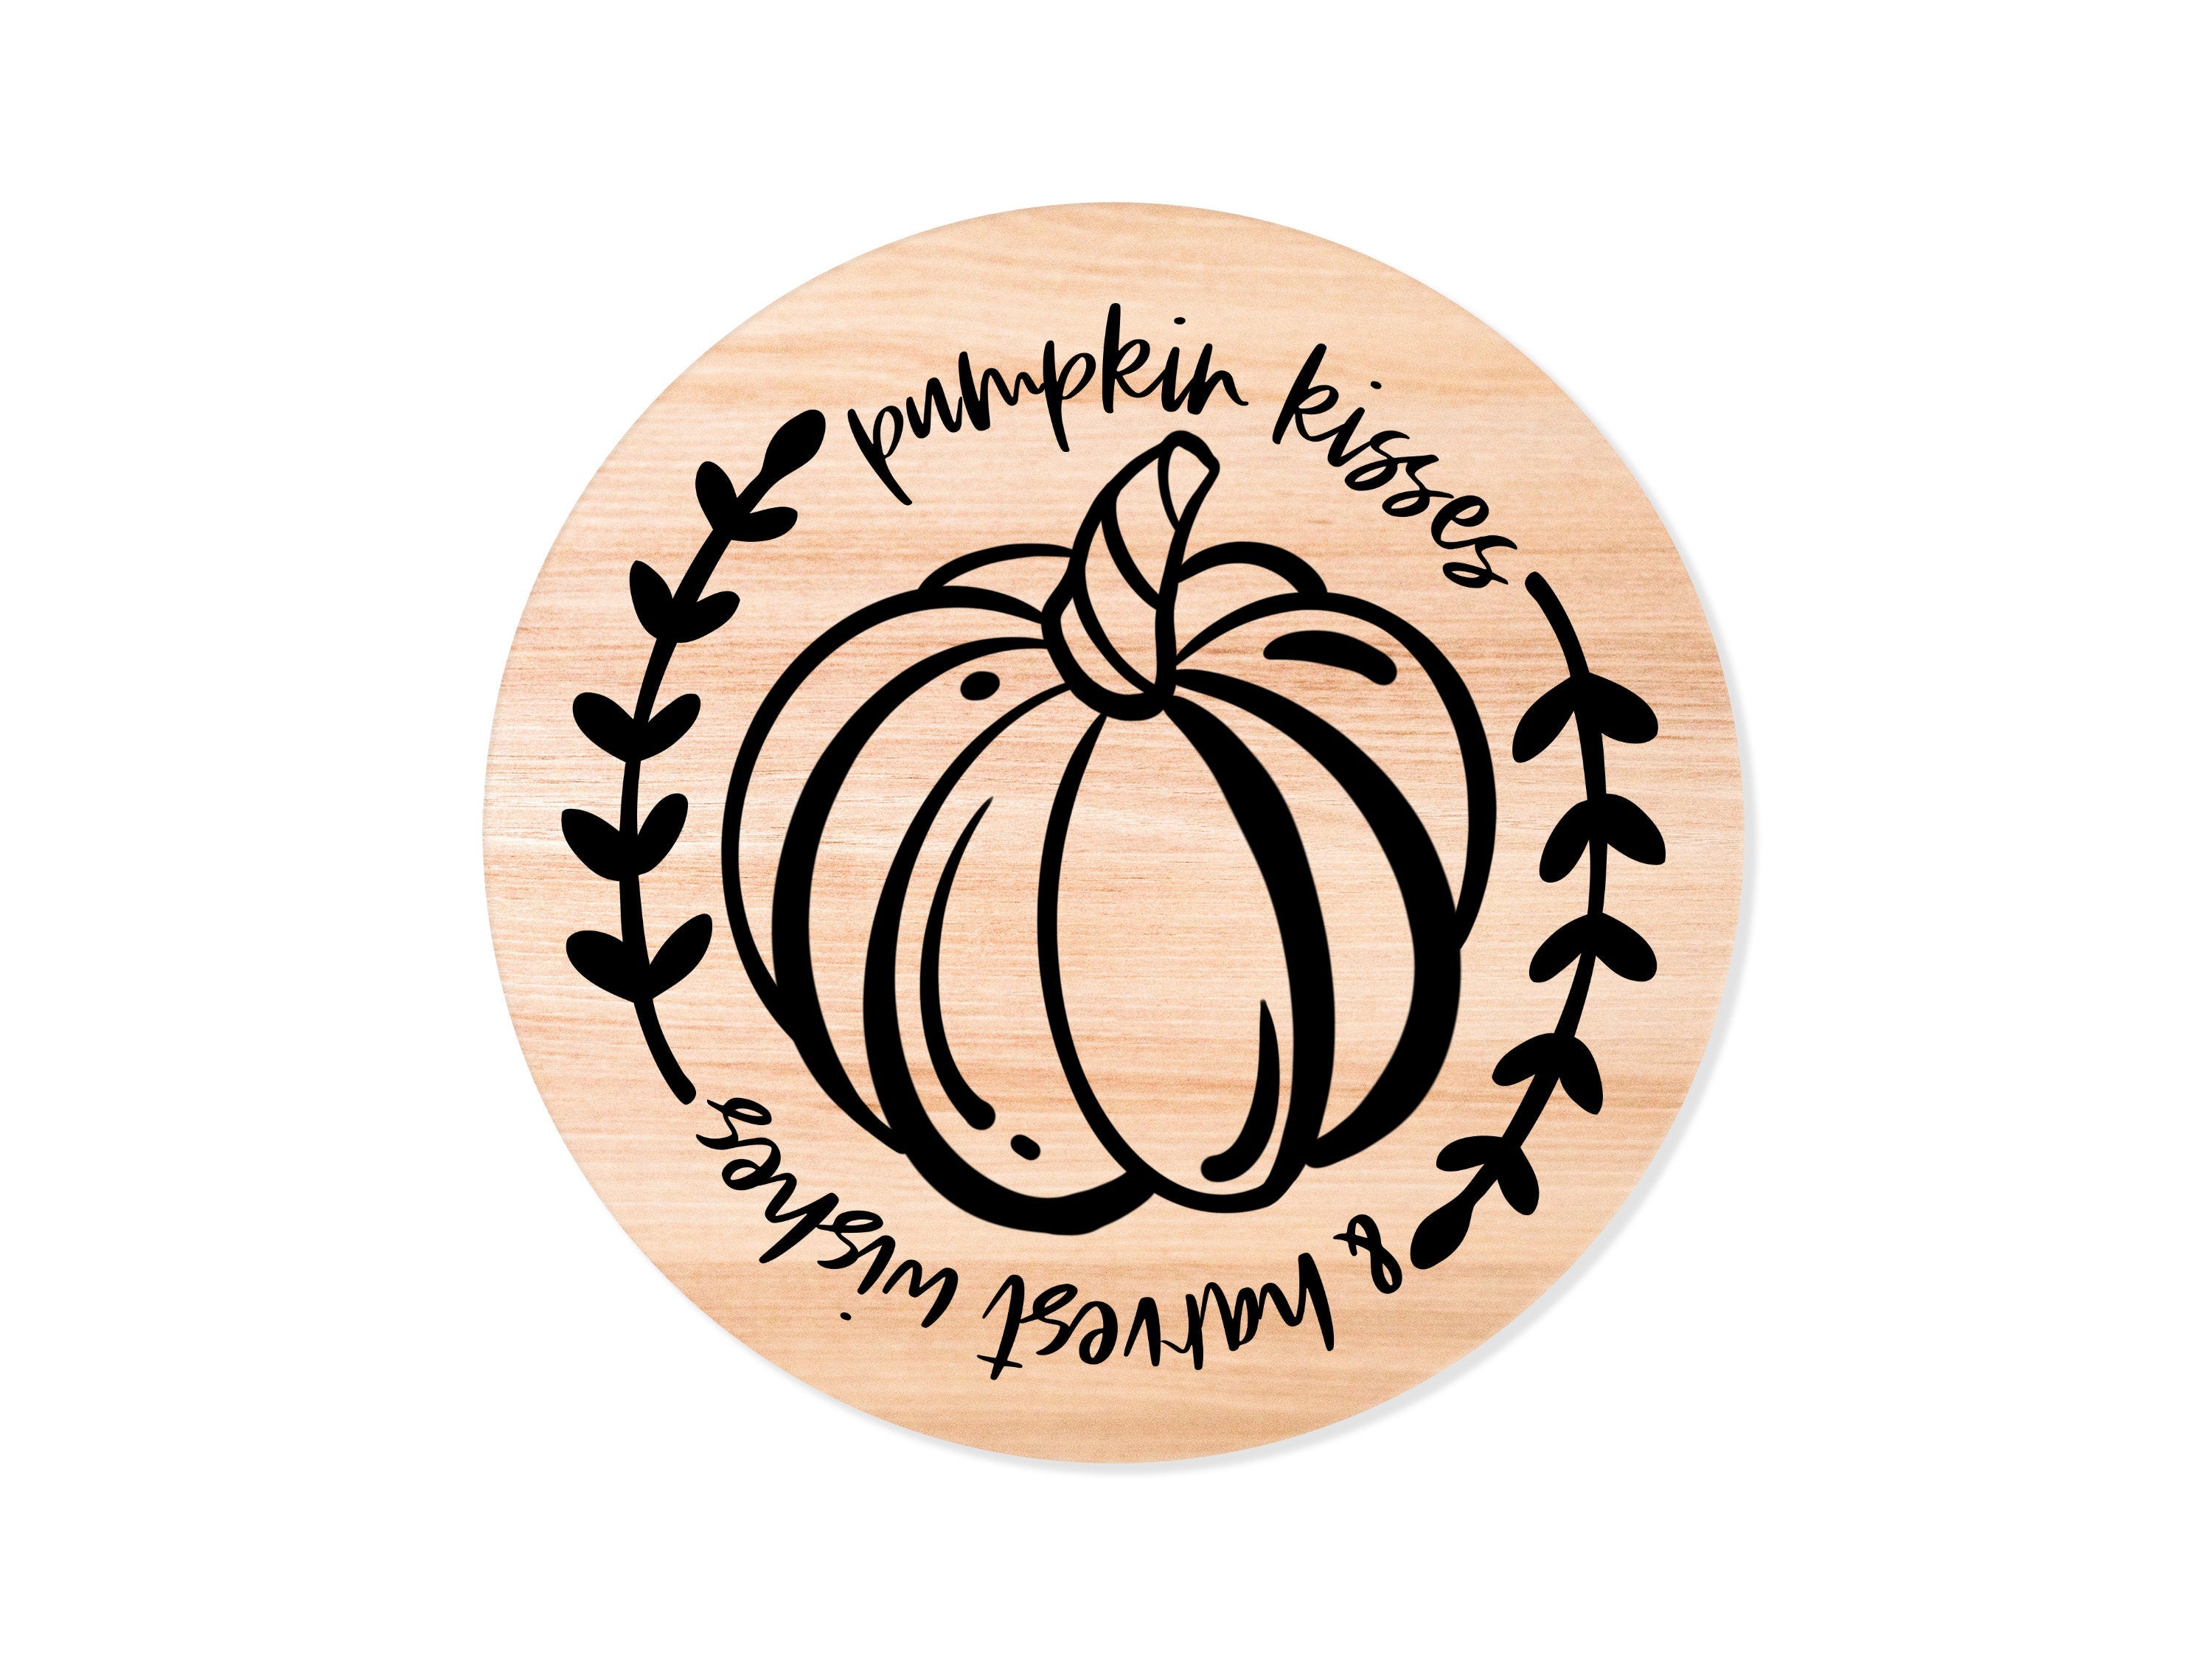 Pumpkin Kisses & Harvest Wishes Fall Decor Round Wooden Plaque Sign with Permanent Vinyl for Home Decoration, Doors, Country Farmhouse Style